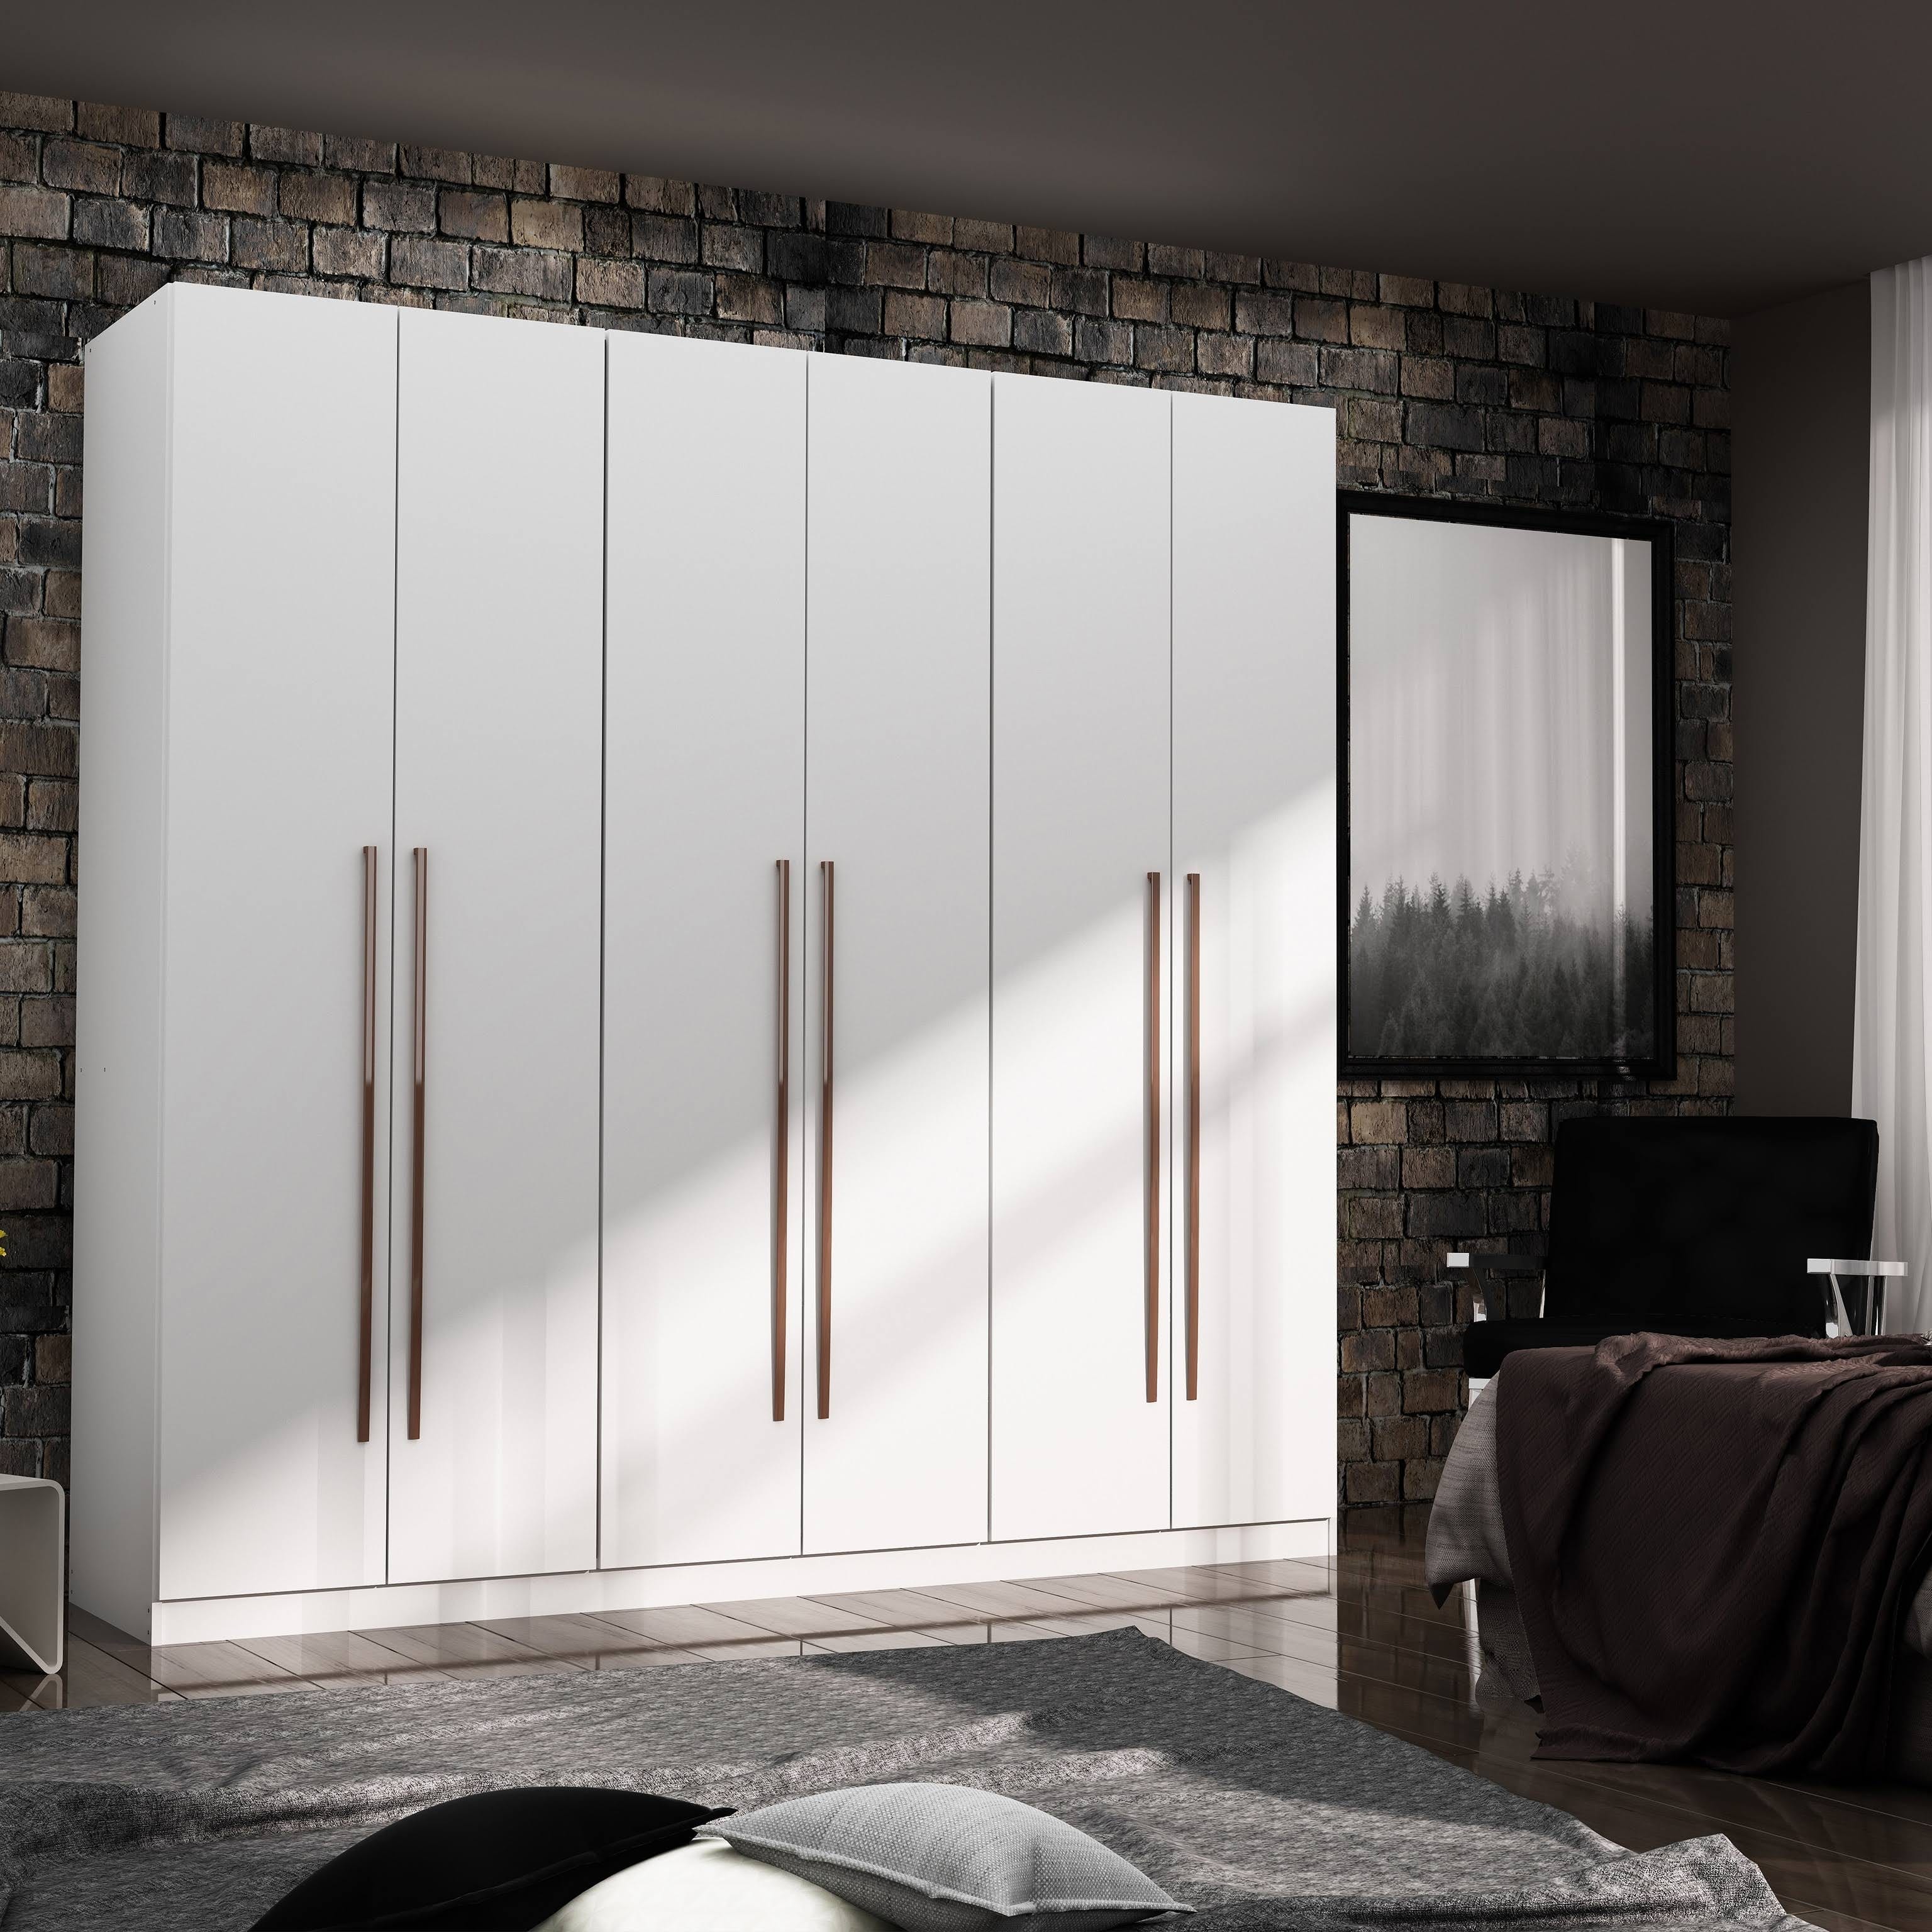 Modern 3-Section Freestanding Wardrobe with Hanging, Drawers, and Ample Storage Space | Image